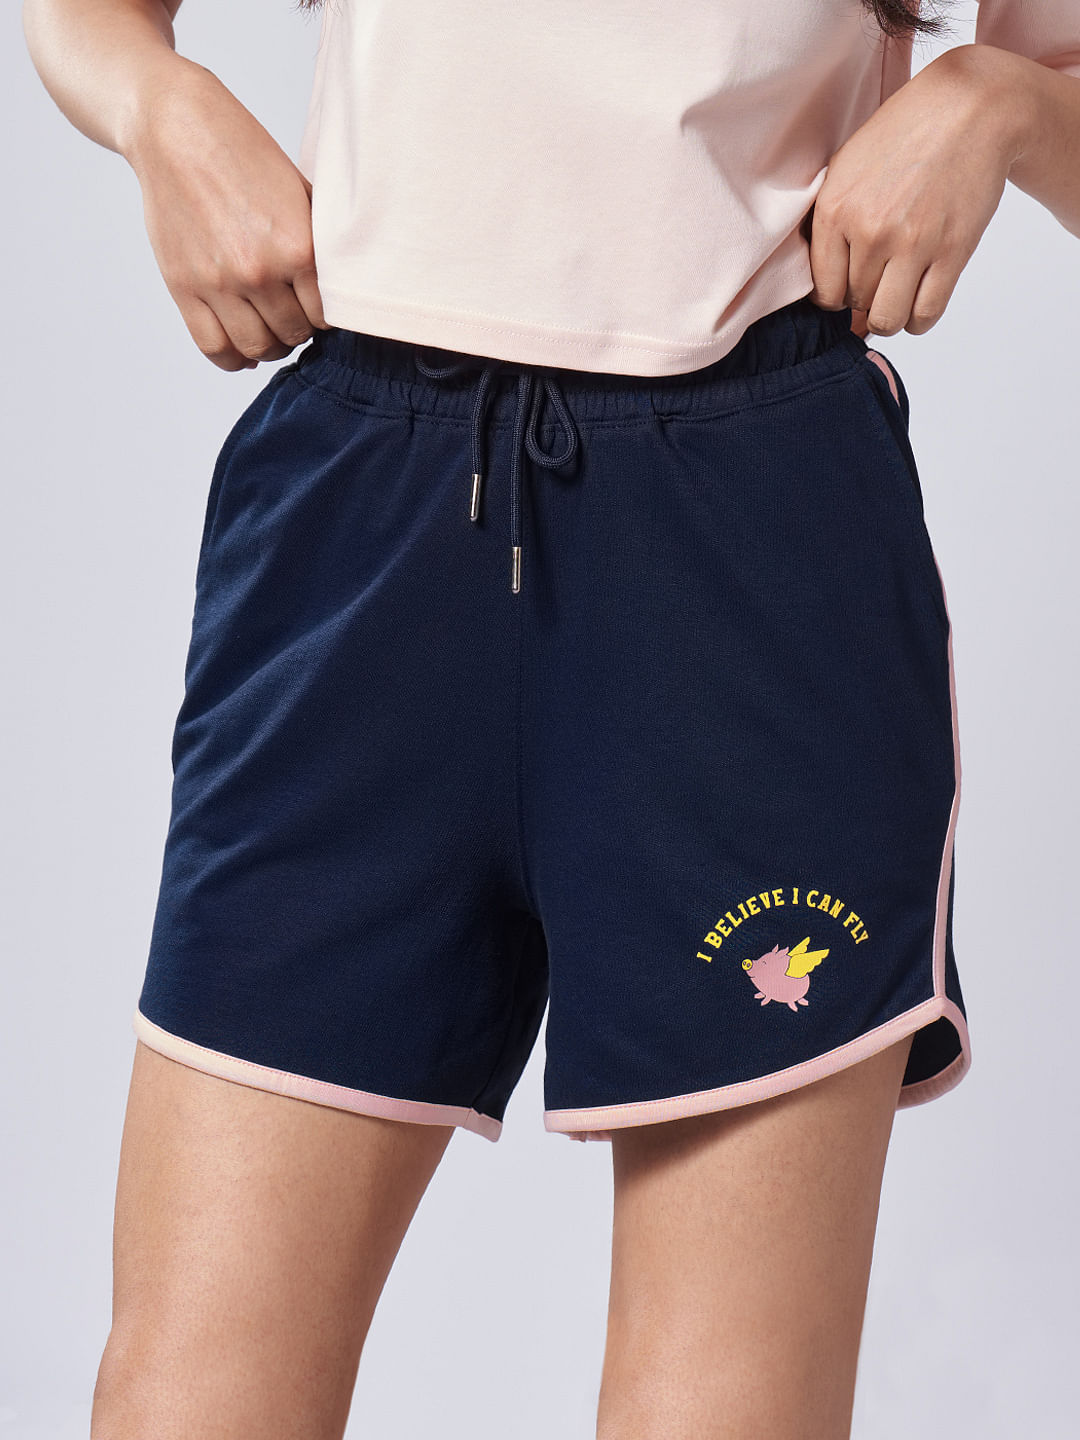 Buy Women's Shorts & Hot Pants Online at The Souled Store